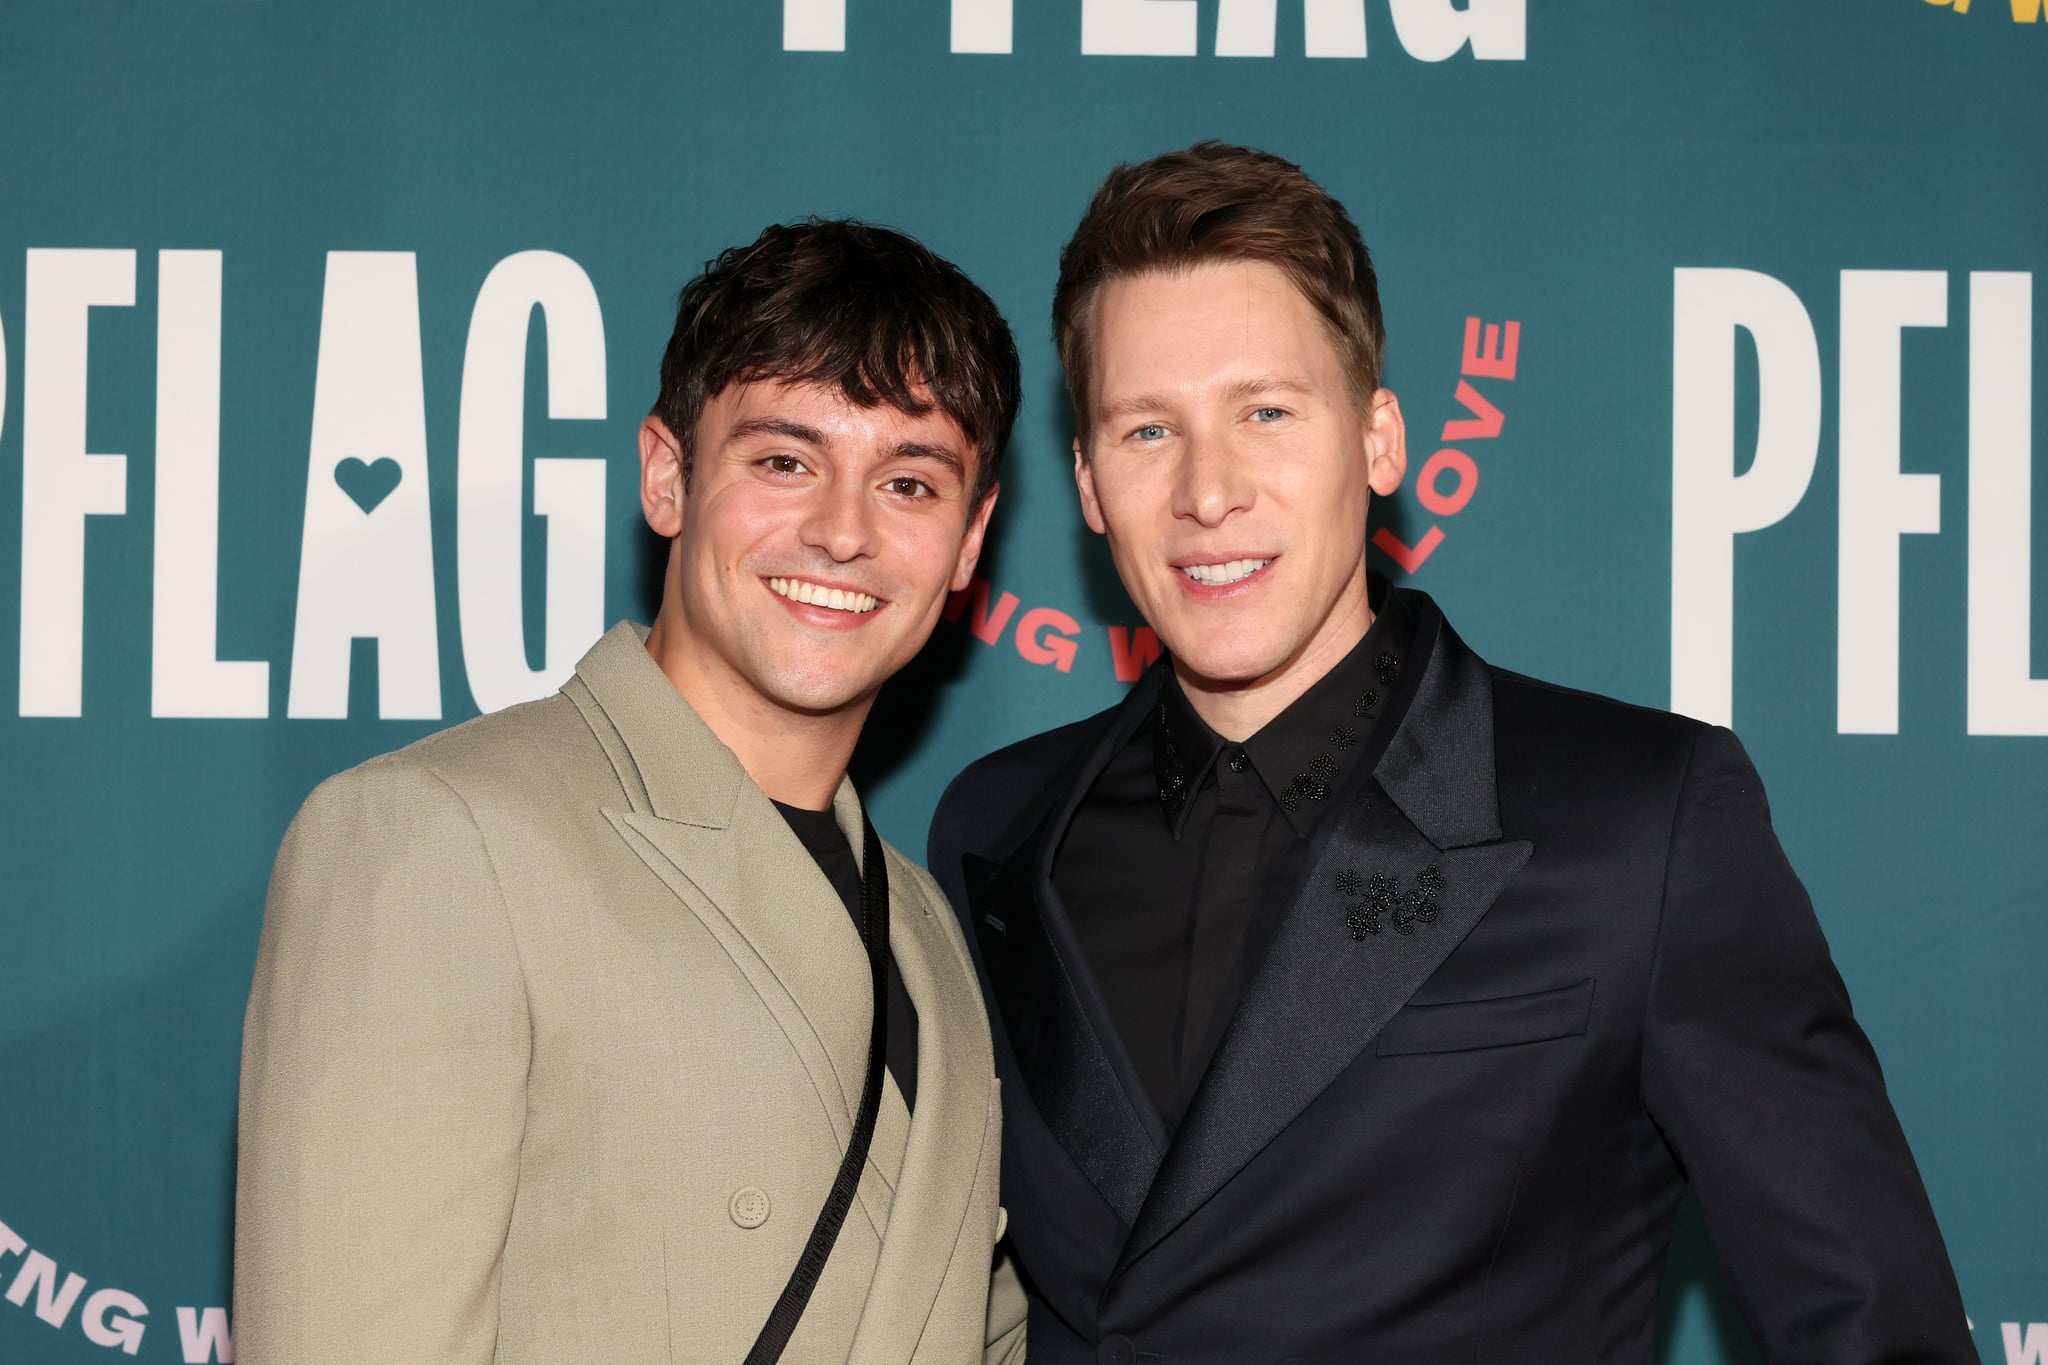 NEW YORK, NEW YORK - MARCH 03: Tom Daley and Dustin Lance Black attend PFLAG National 50th Anniversary Gala at Marriott Marquis on March 03, 2023 in New York City. (Photo by Dia Dipasupil/Getty Images for PFLAG)